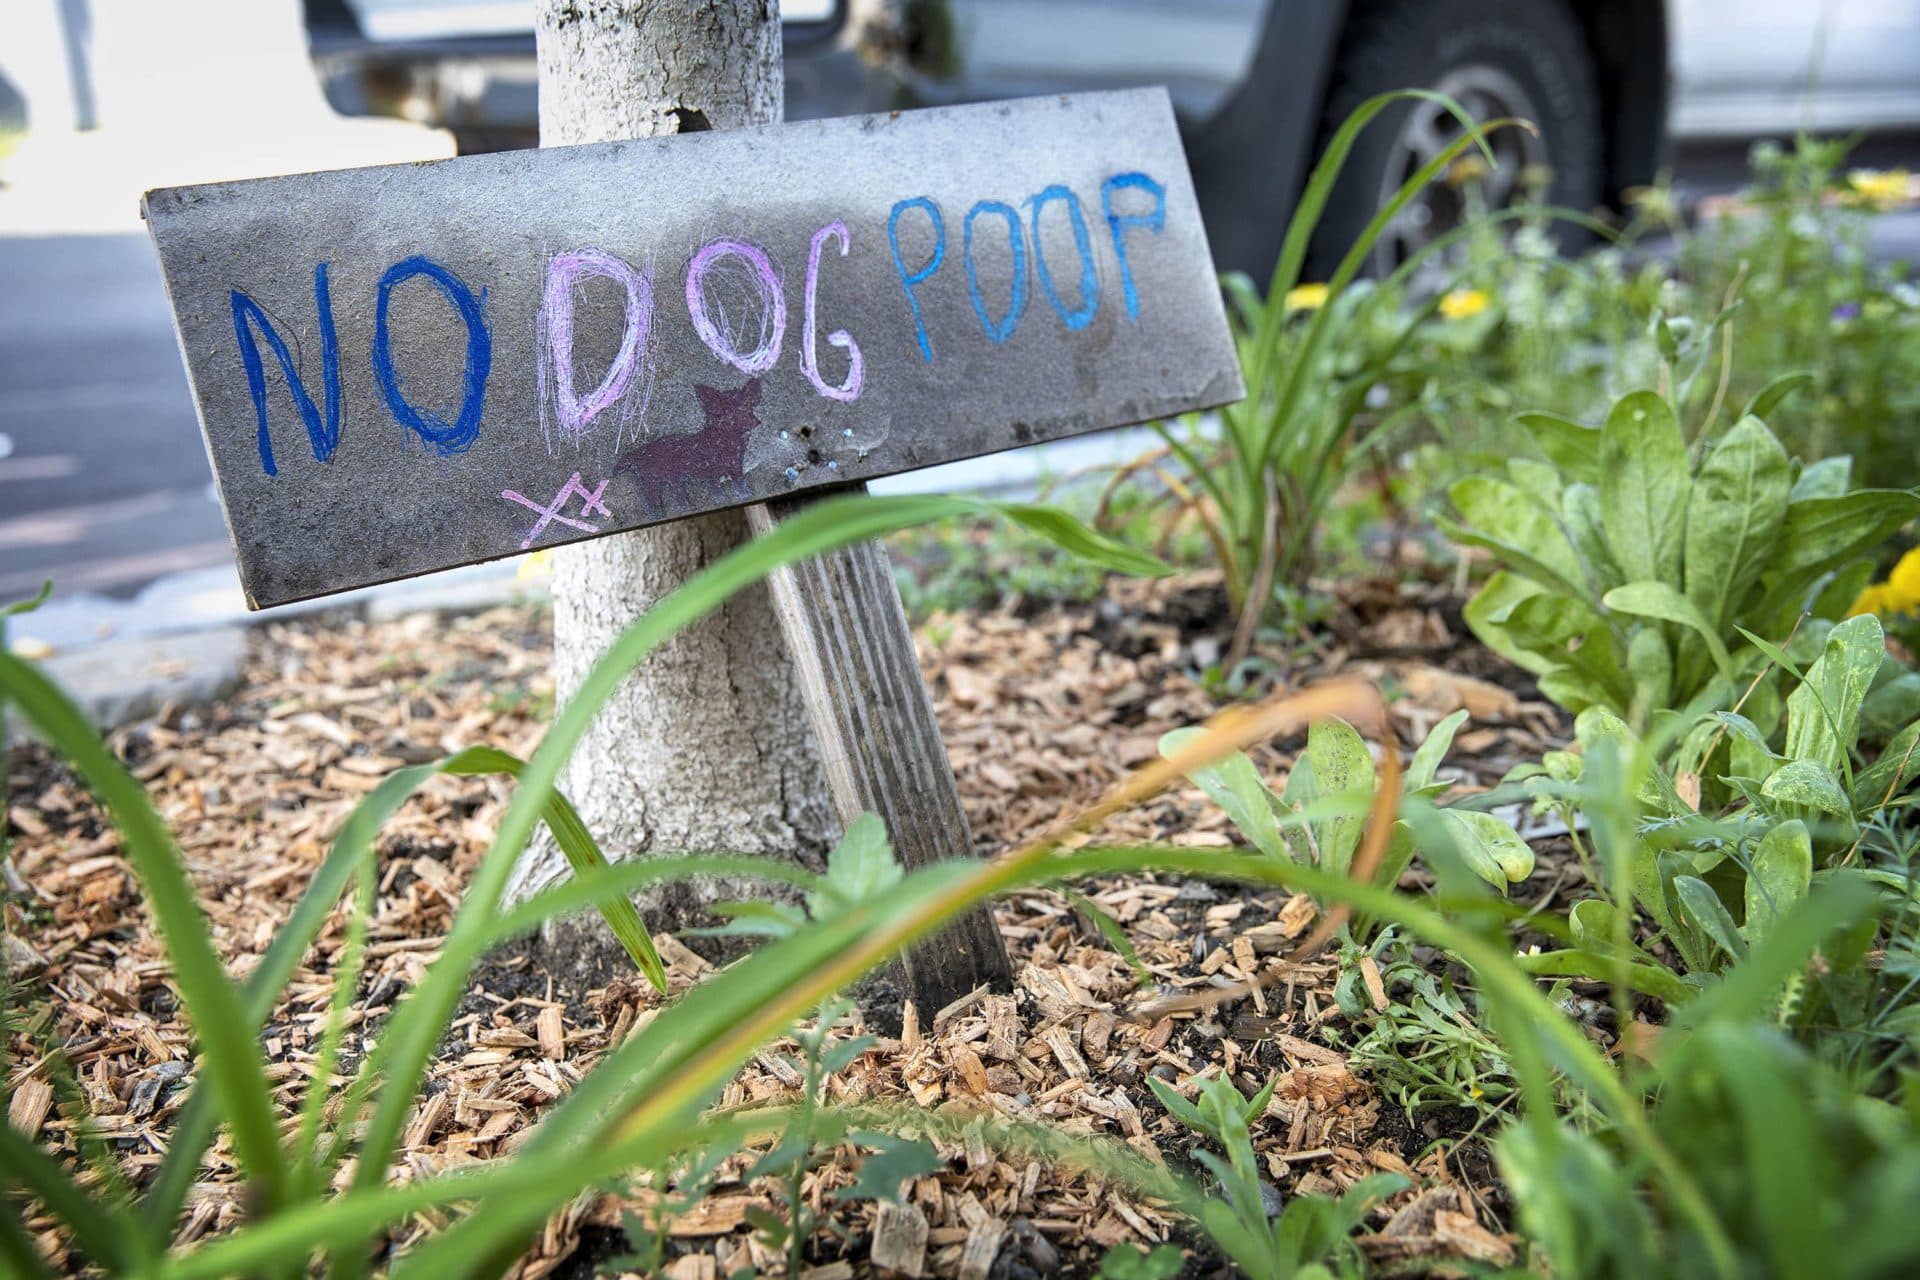  To discourage dog owners from allowing their dogs to &quot;contribute&quot; to the tree project, Eugenia Corbo's family planted a &quot;No Dog Poop&quot; sign by the ginkgo tree. (Robin Lubbock/WBUR)